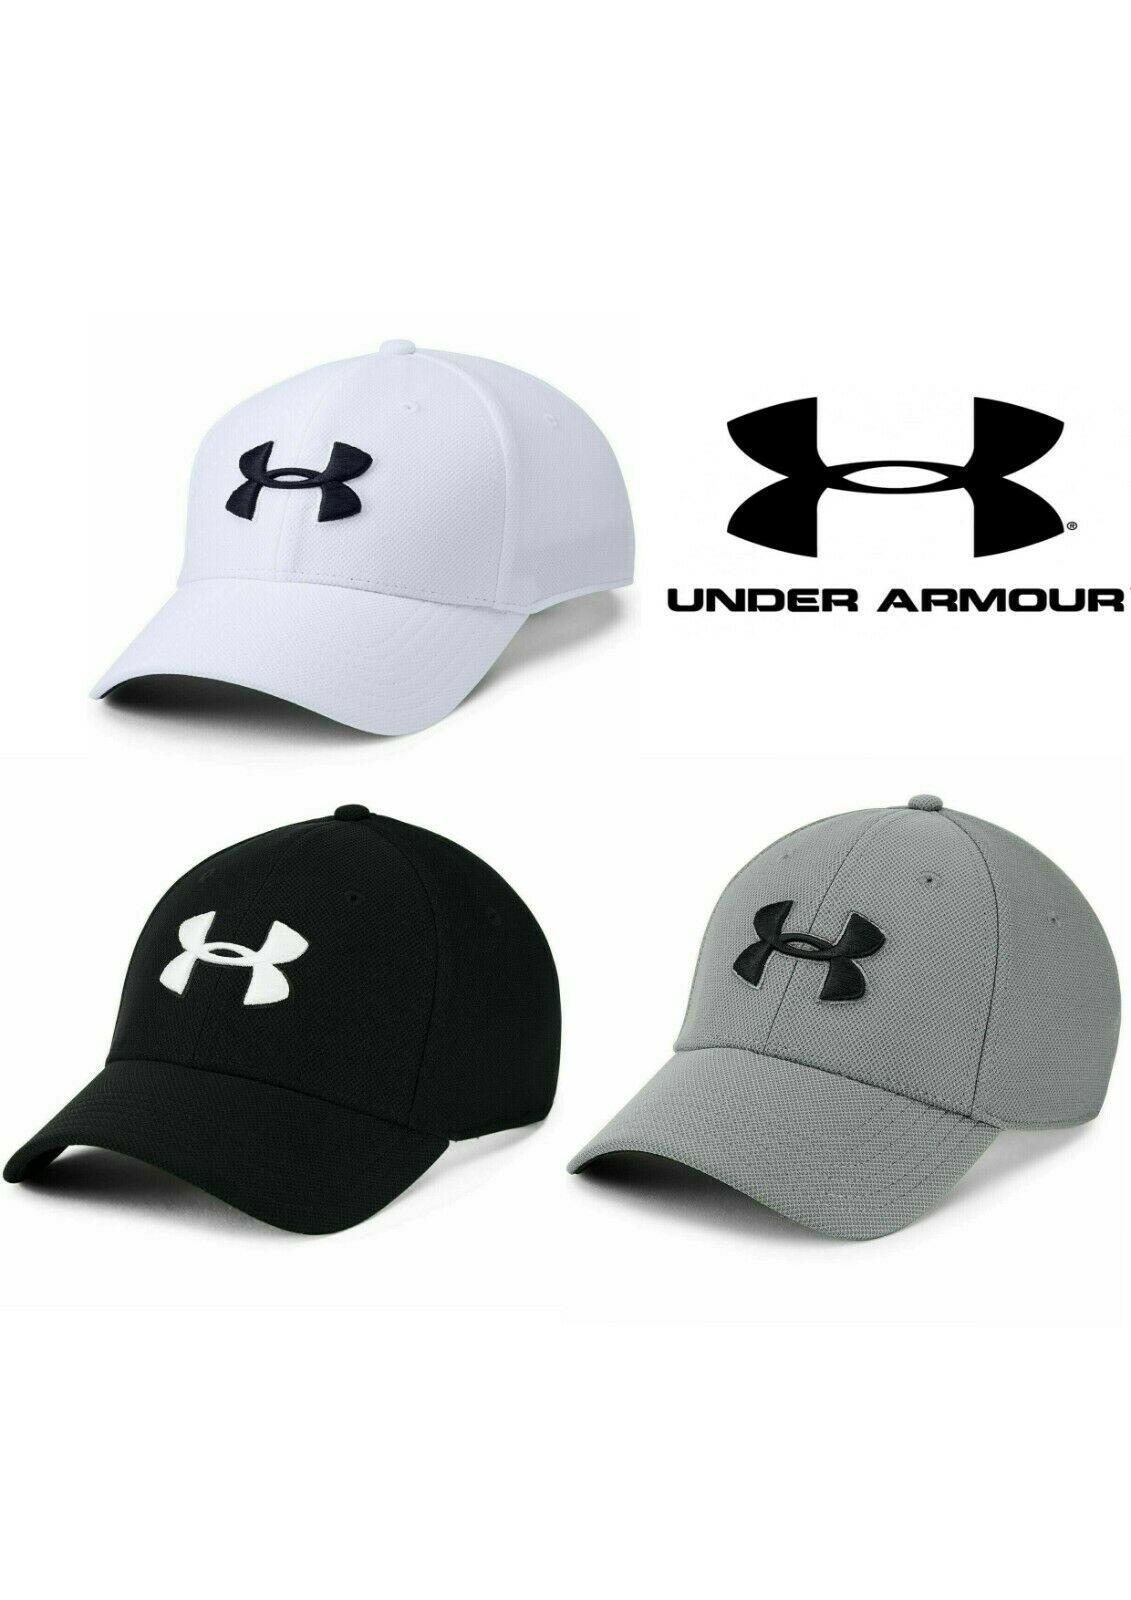 Under Armour Blitzing Breathable Golf Cap Hat